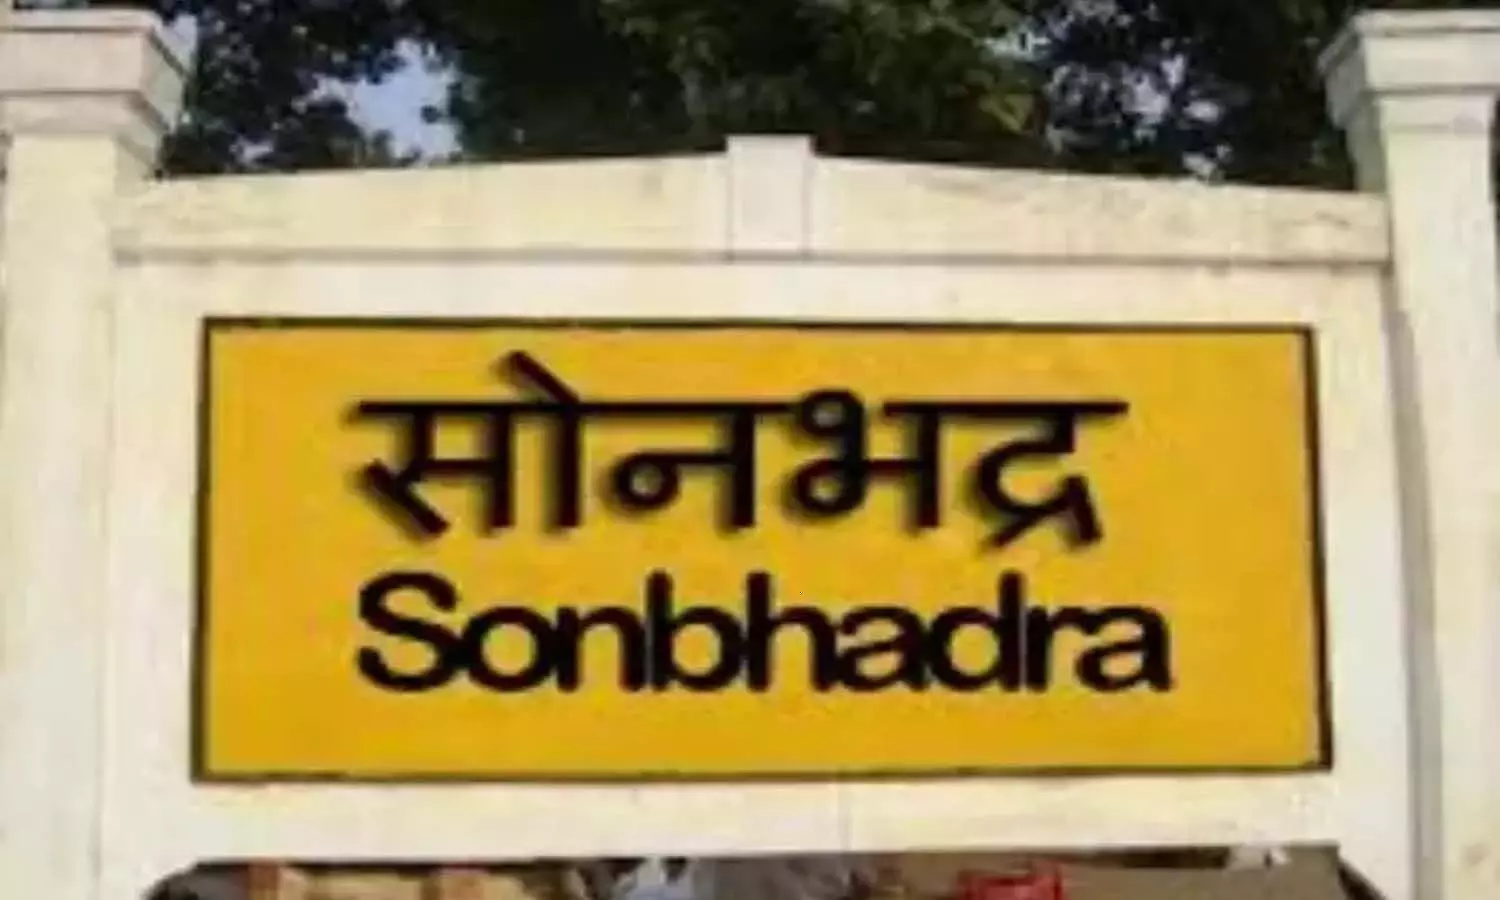 The occupiers of railway land will not be evicted in Sonbhadra, the High Court has banned